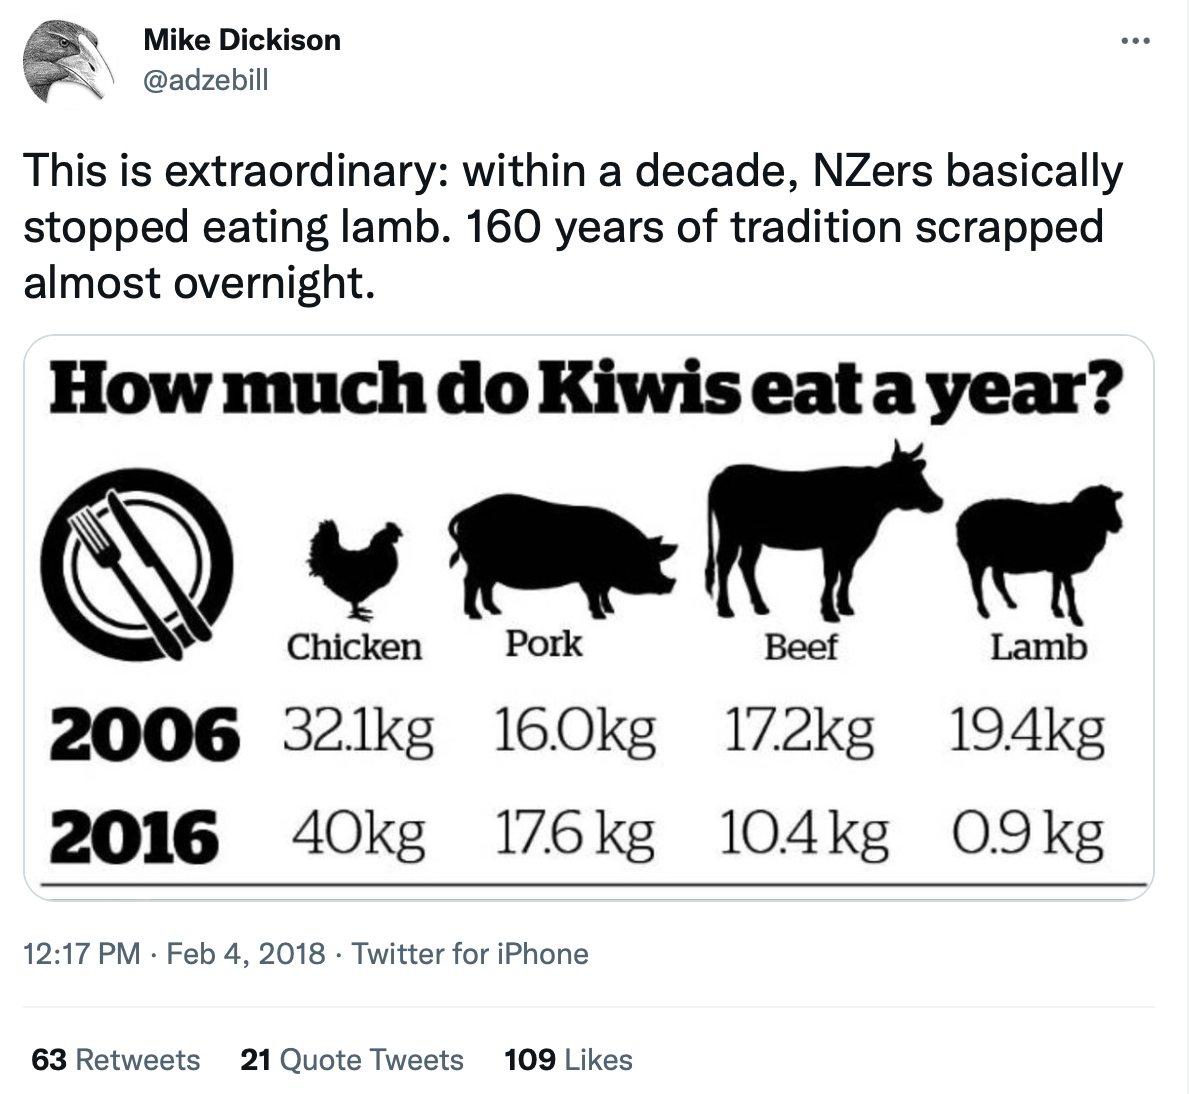 How much meat do Kiwis eat a year?